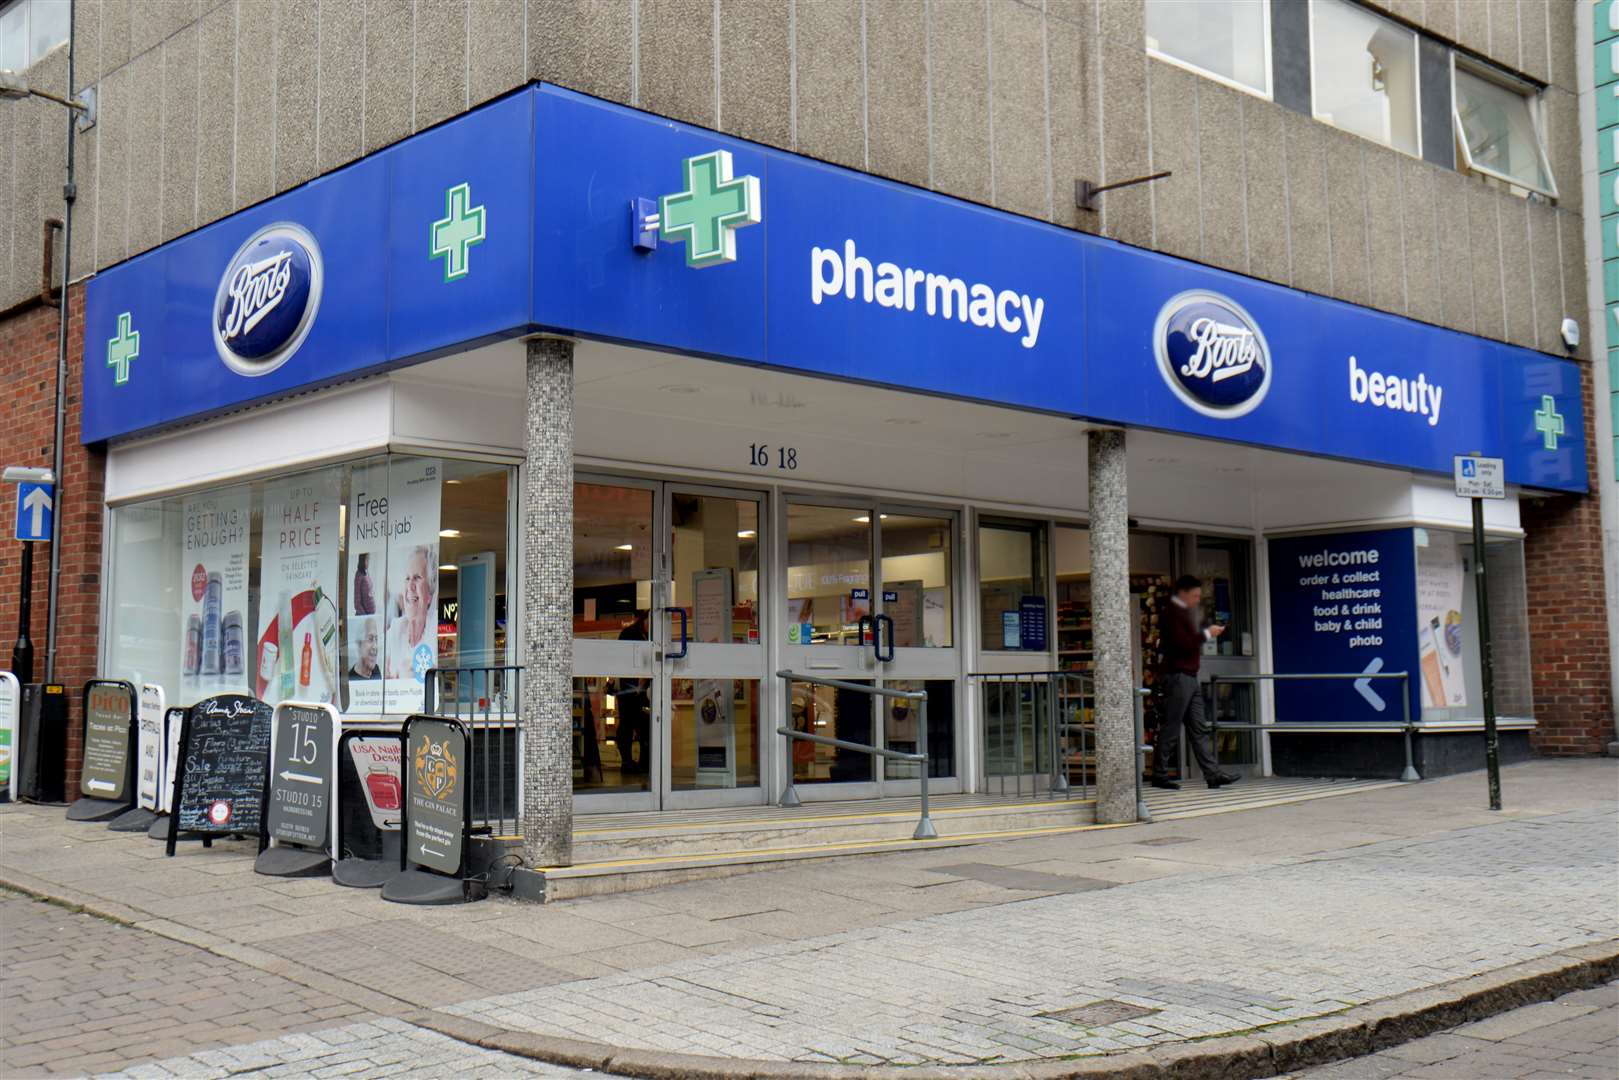 Boots pharmacy also announced it would be adjusting its working hours for staff